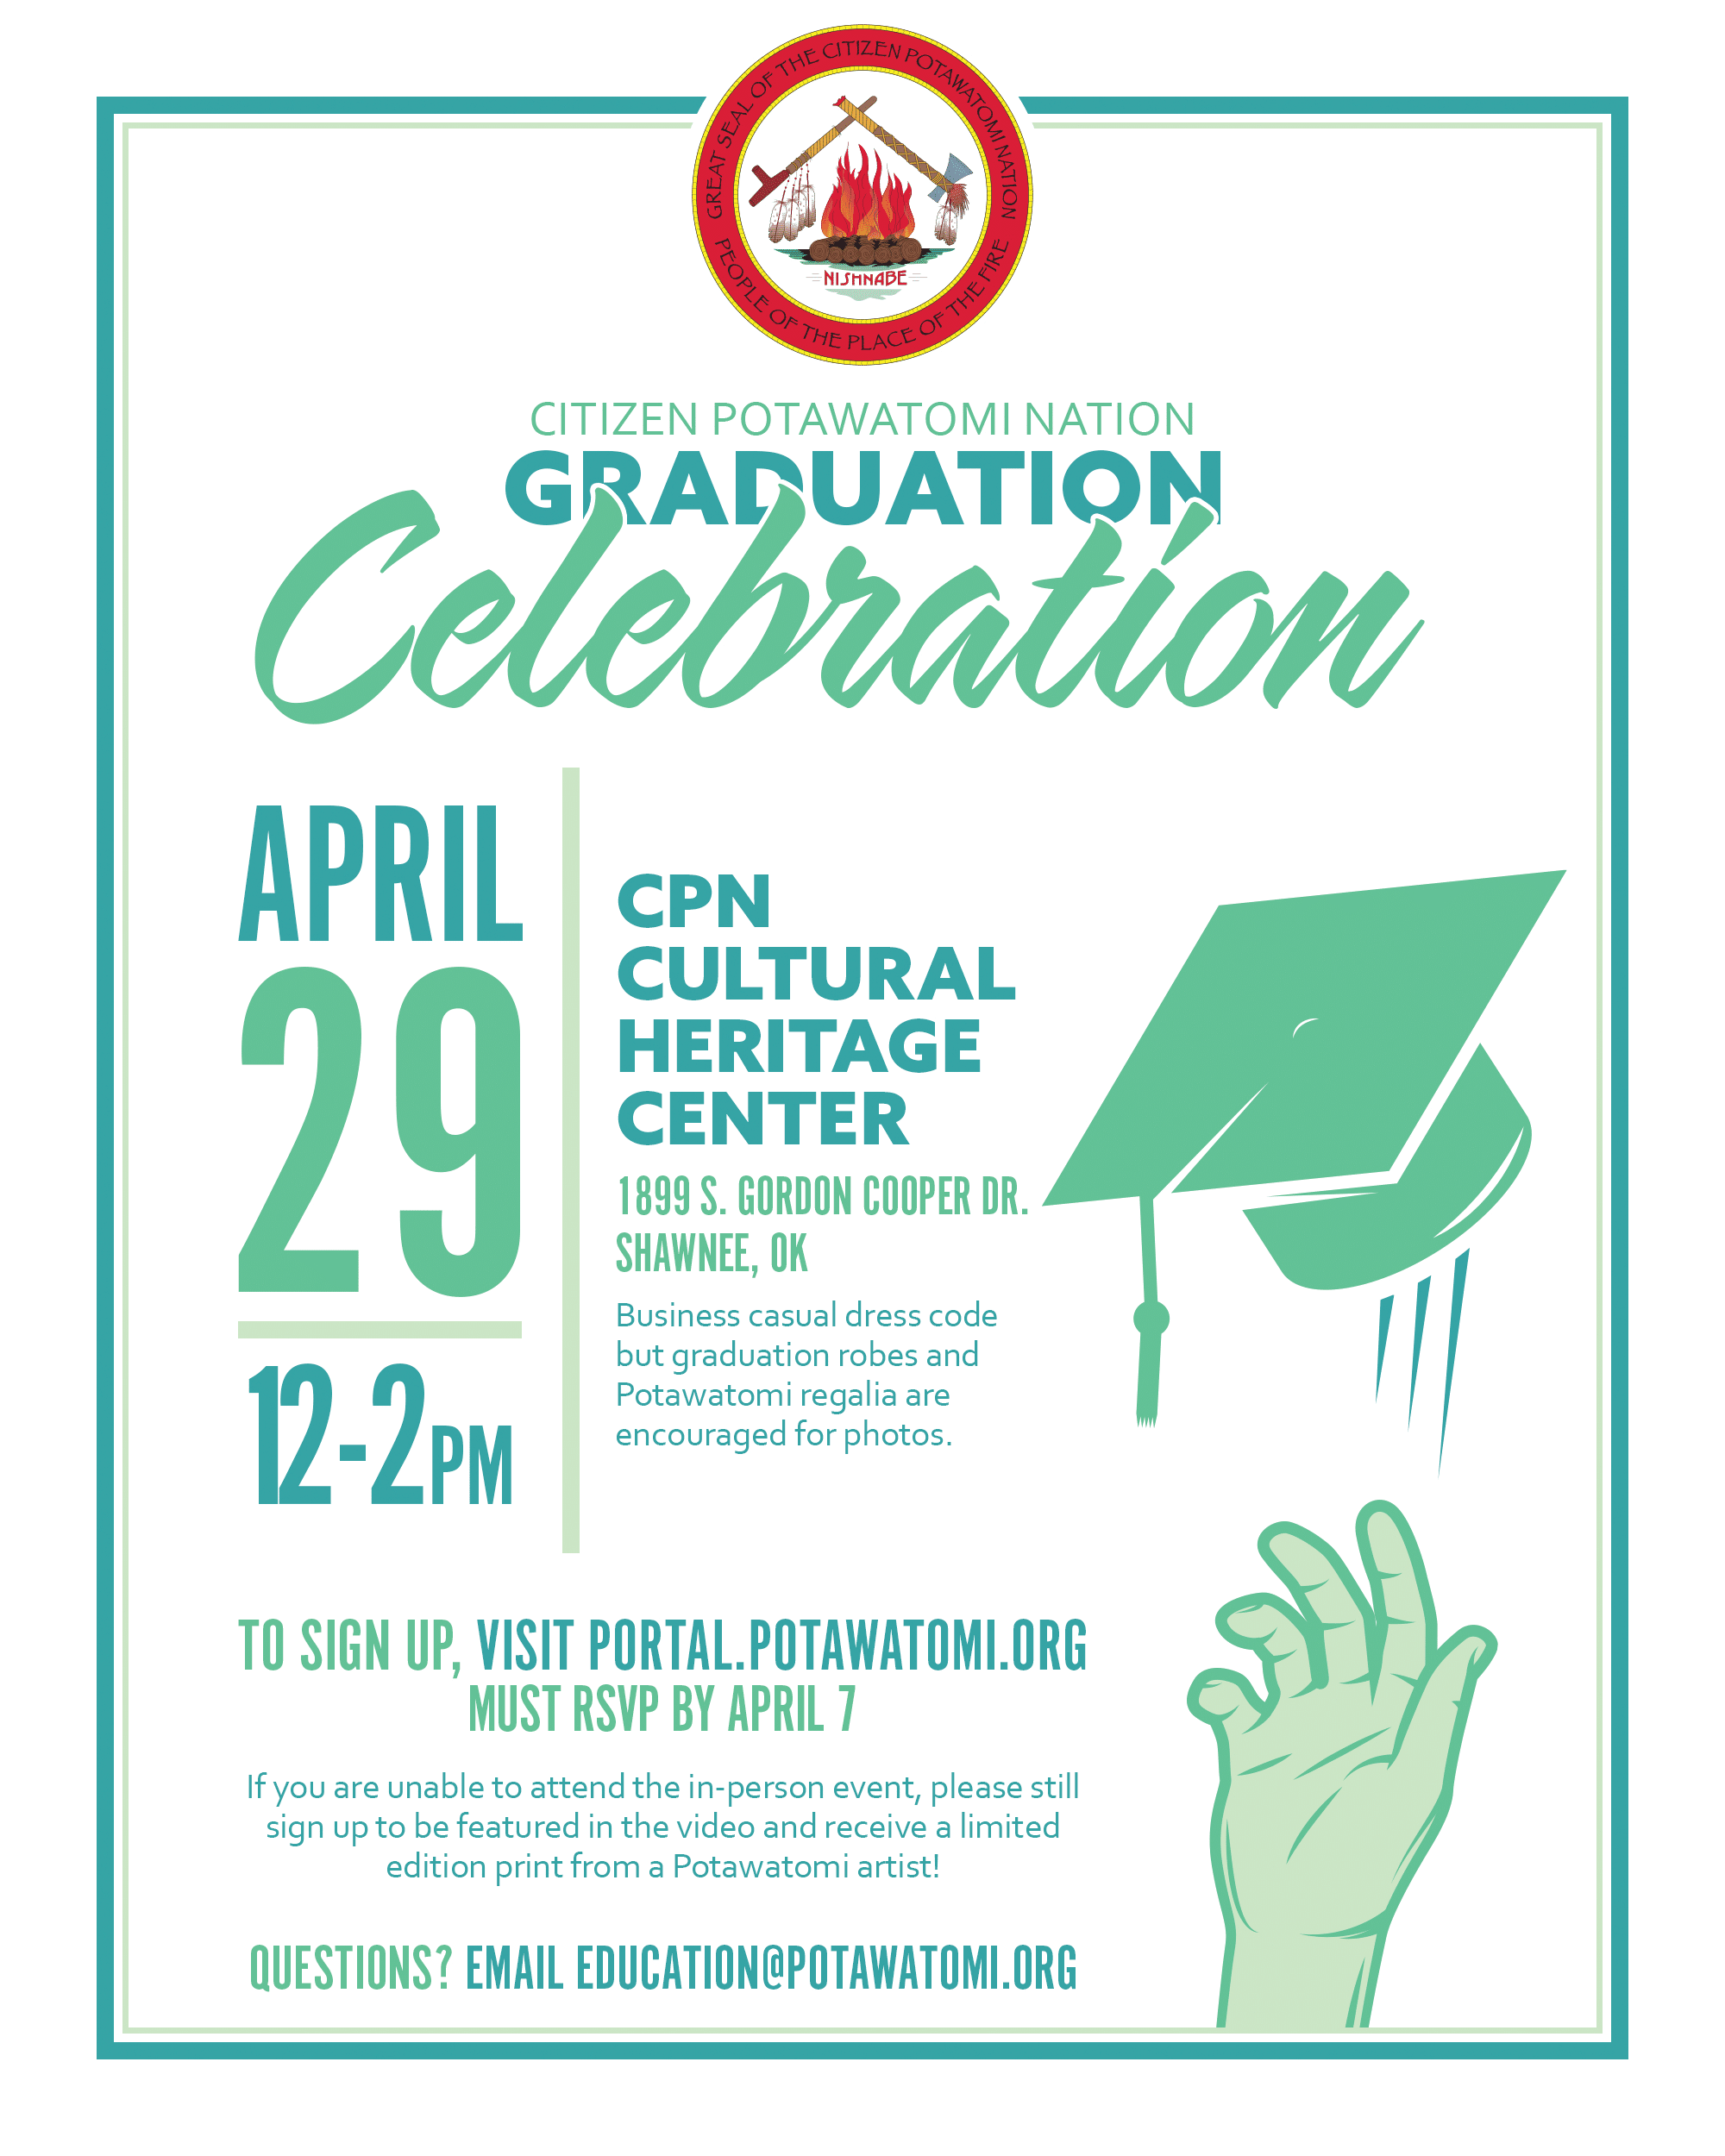 Green text and graphic of a hand throwing a graduation cap in the air for the CPN Department of Education Graduation Celebration on April 29.